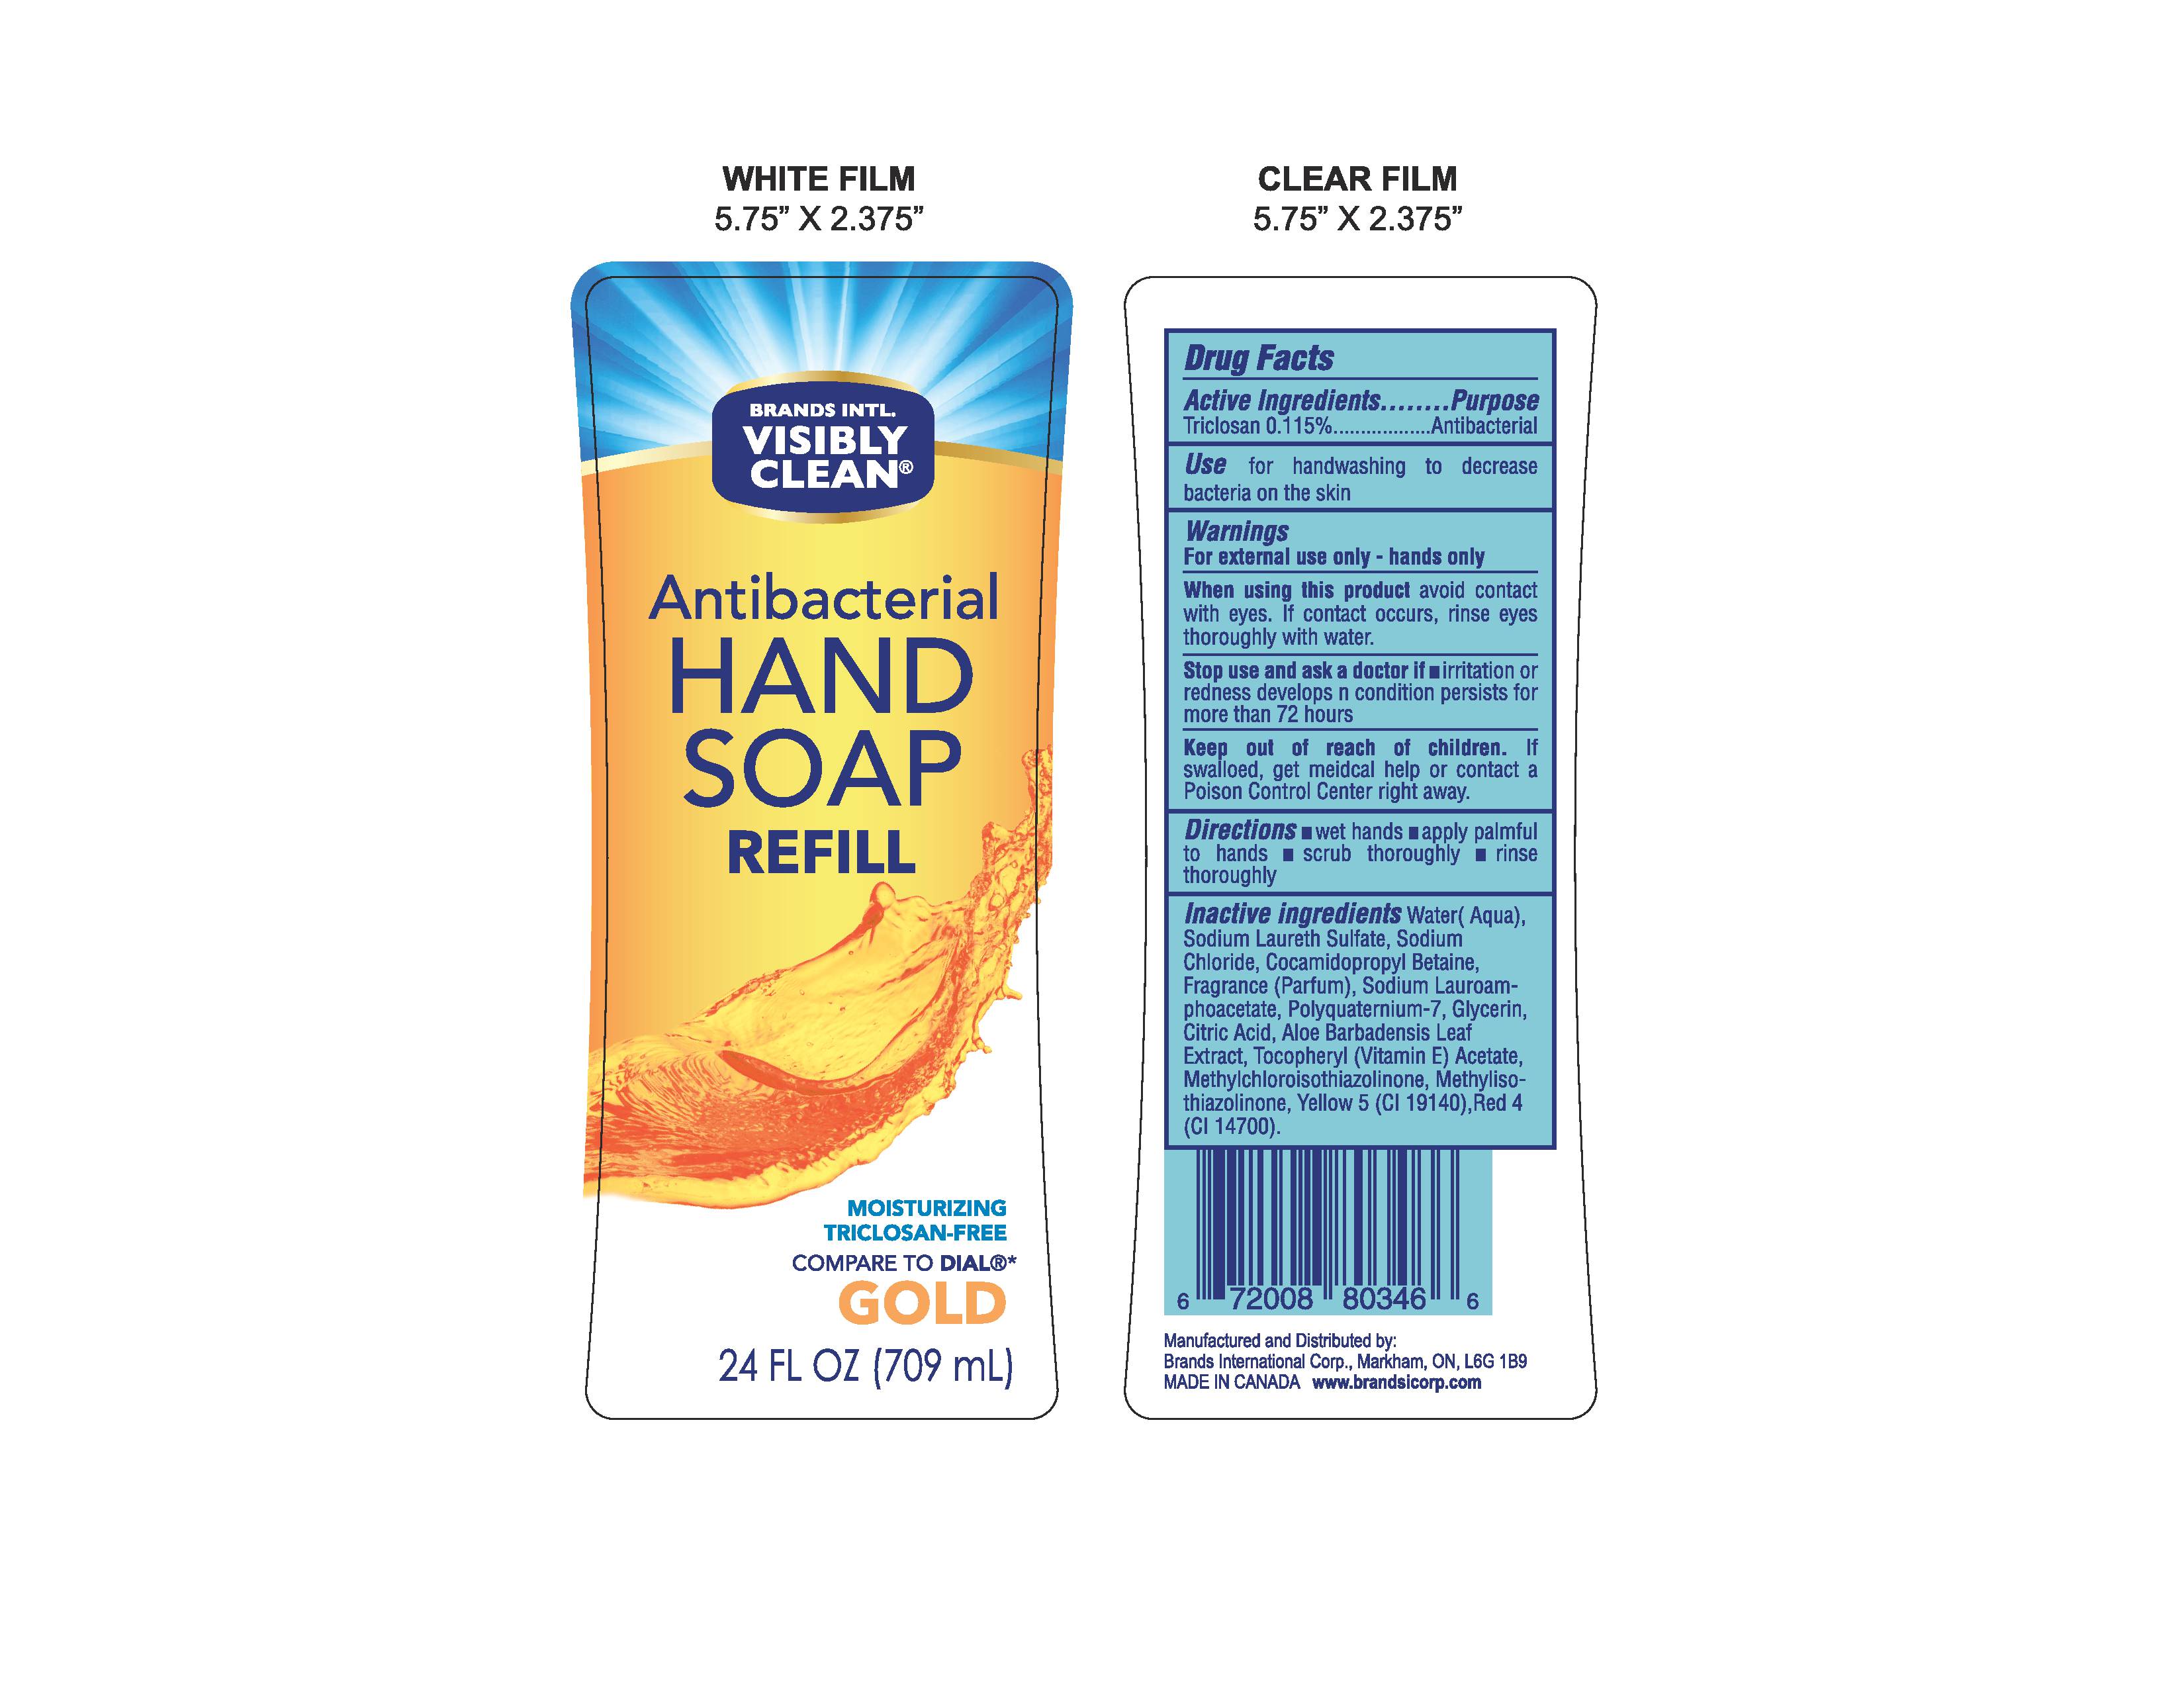 Visibly Clean Antibacterial Hand Soap Refill